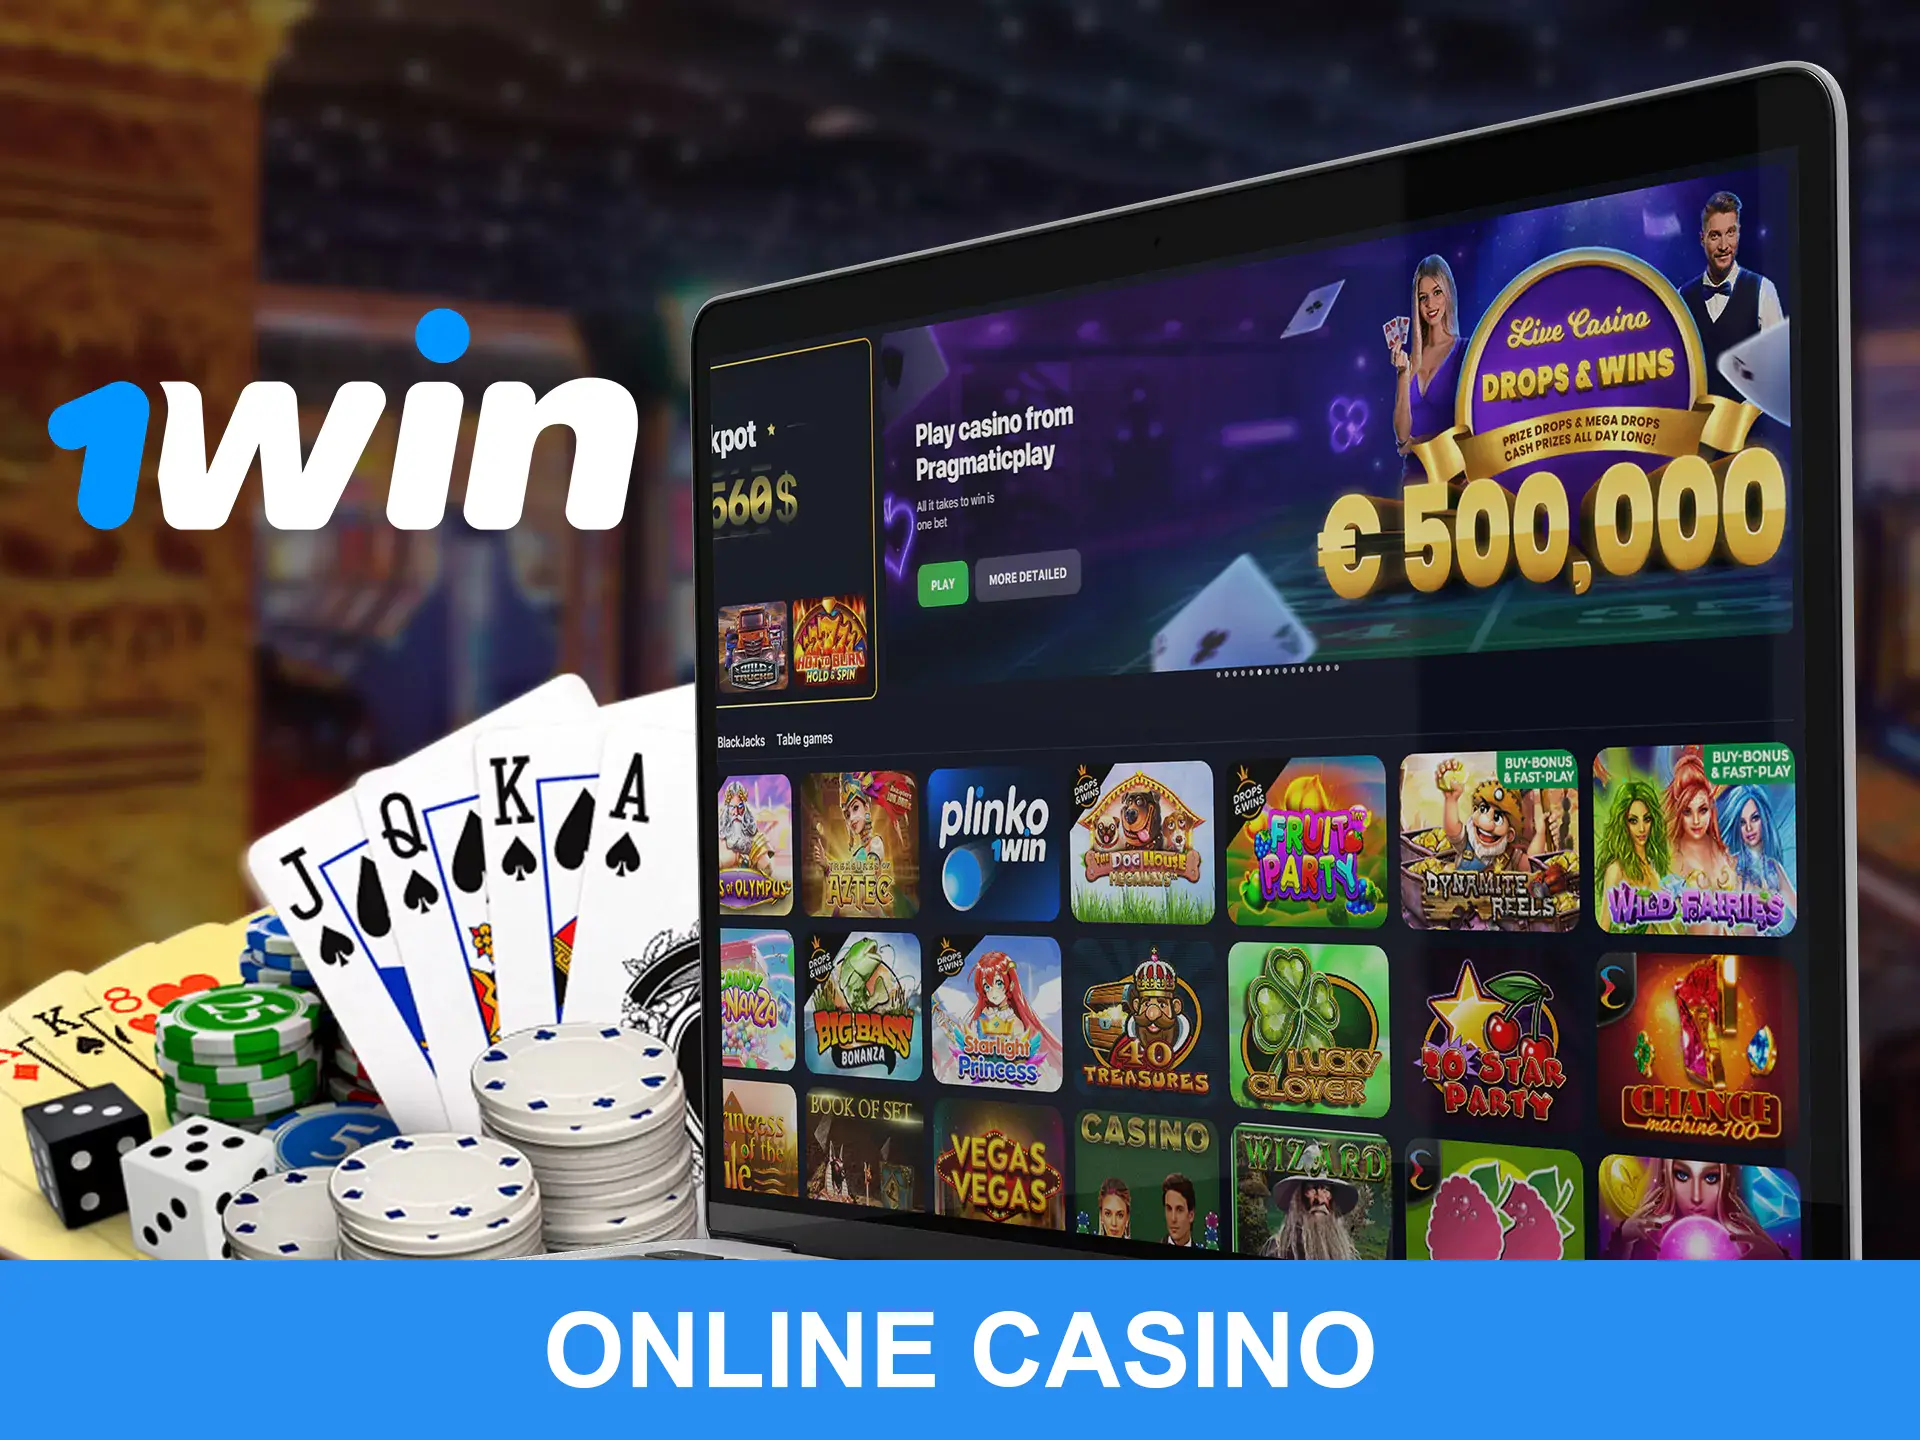 Choose your favourite casino game at 1Win.